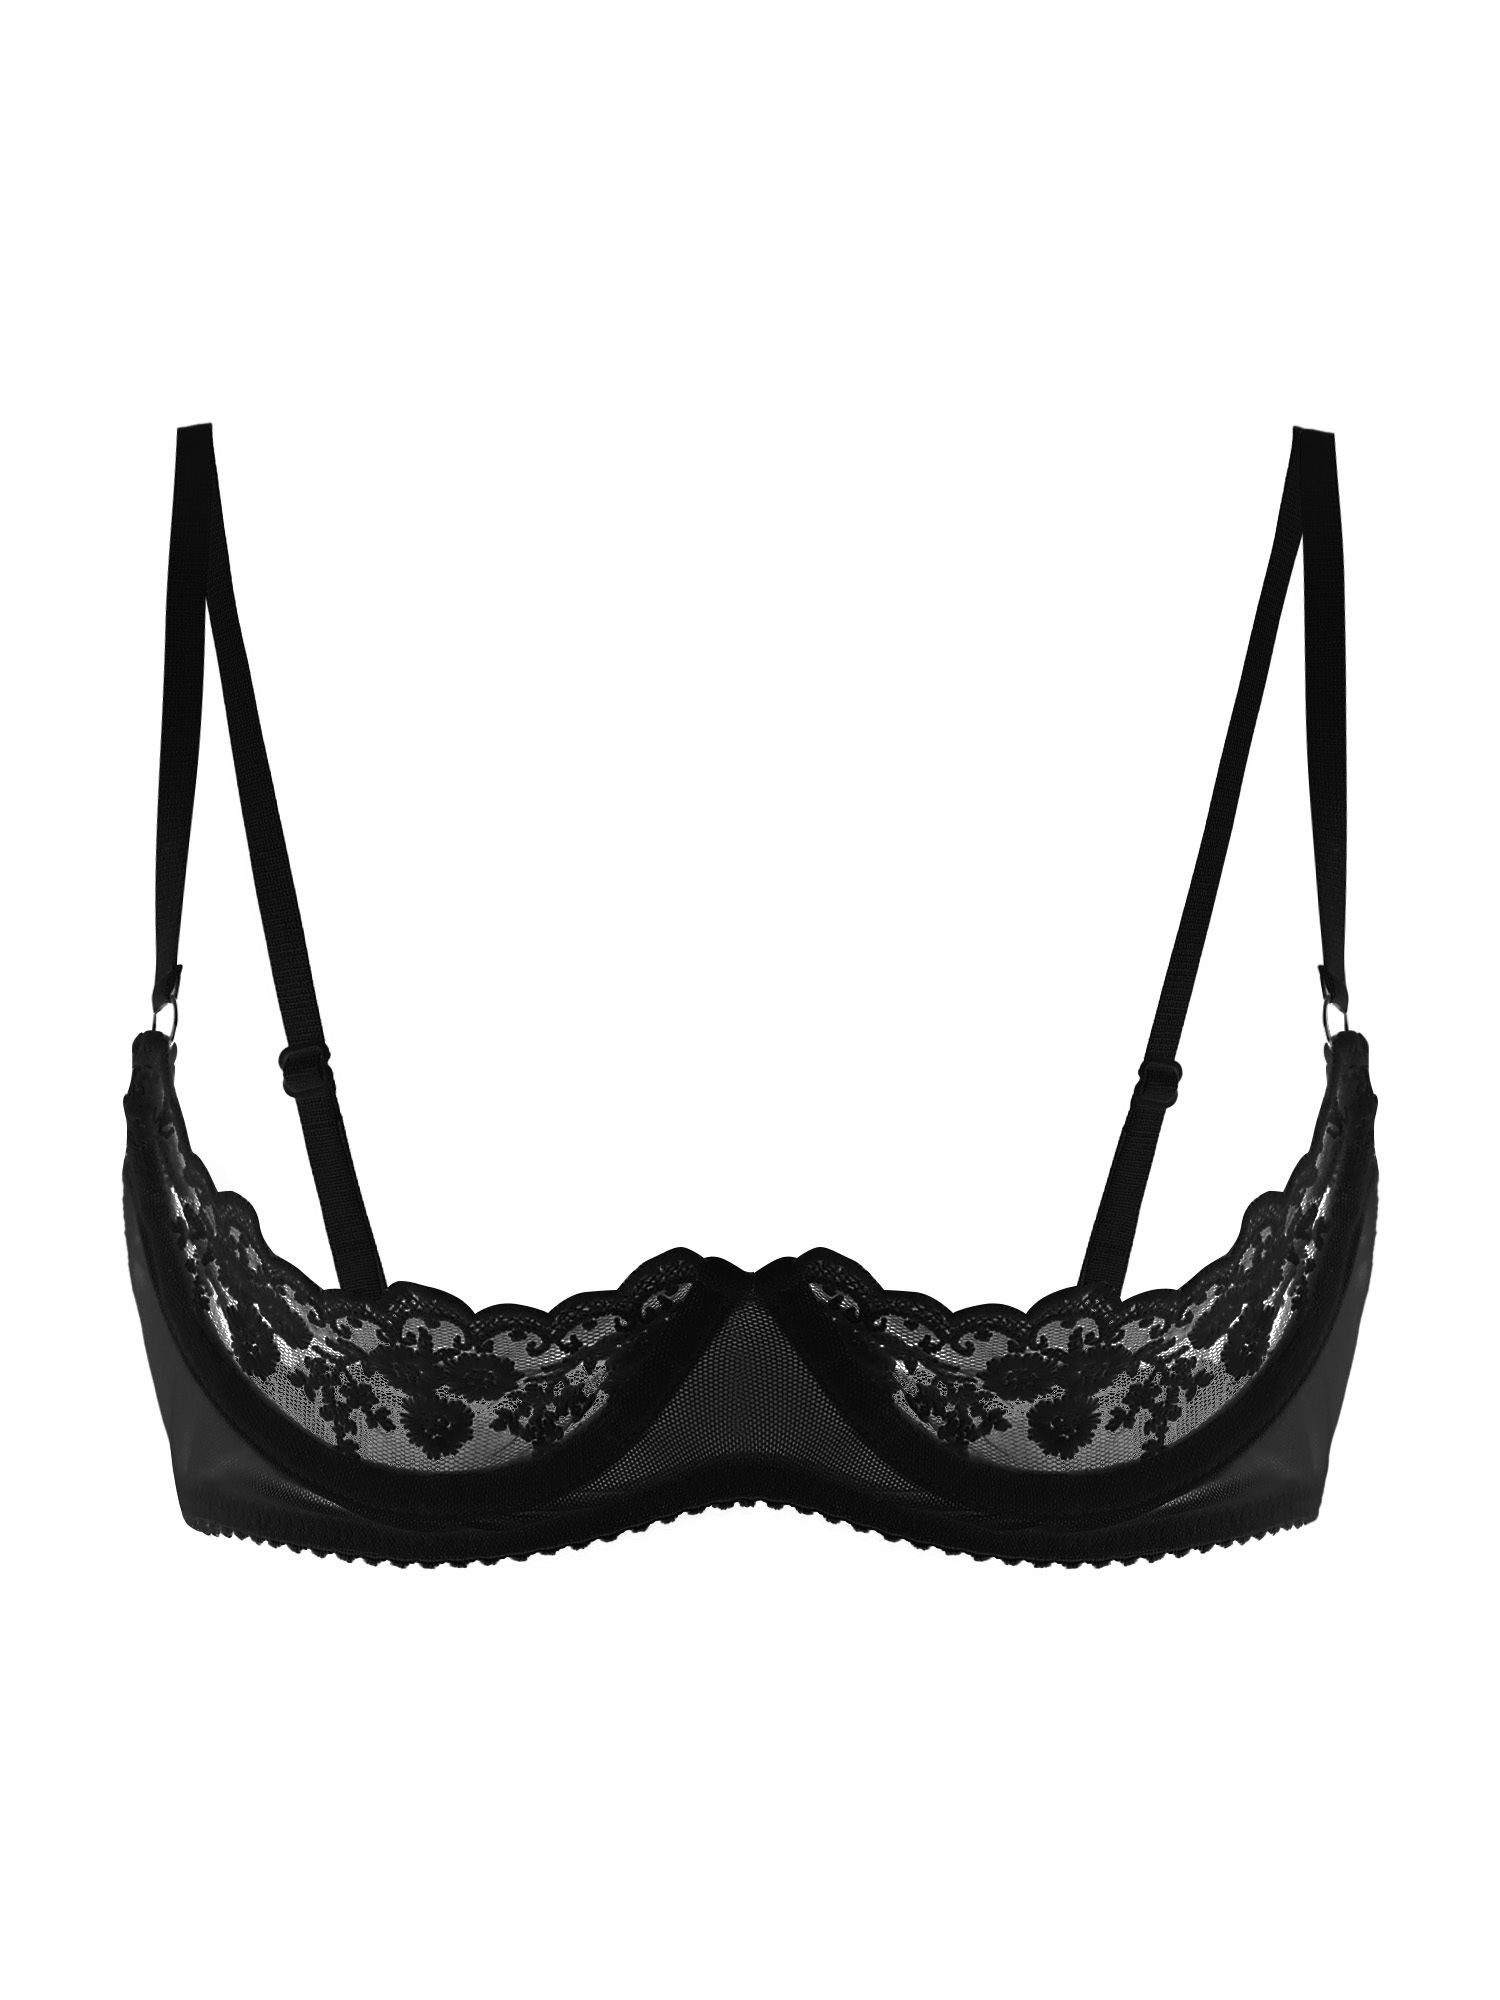 MSemis Women's Hollow Out Lingerie Open Cups Bra Push Up Underwire Bra ...